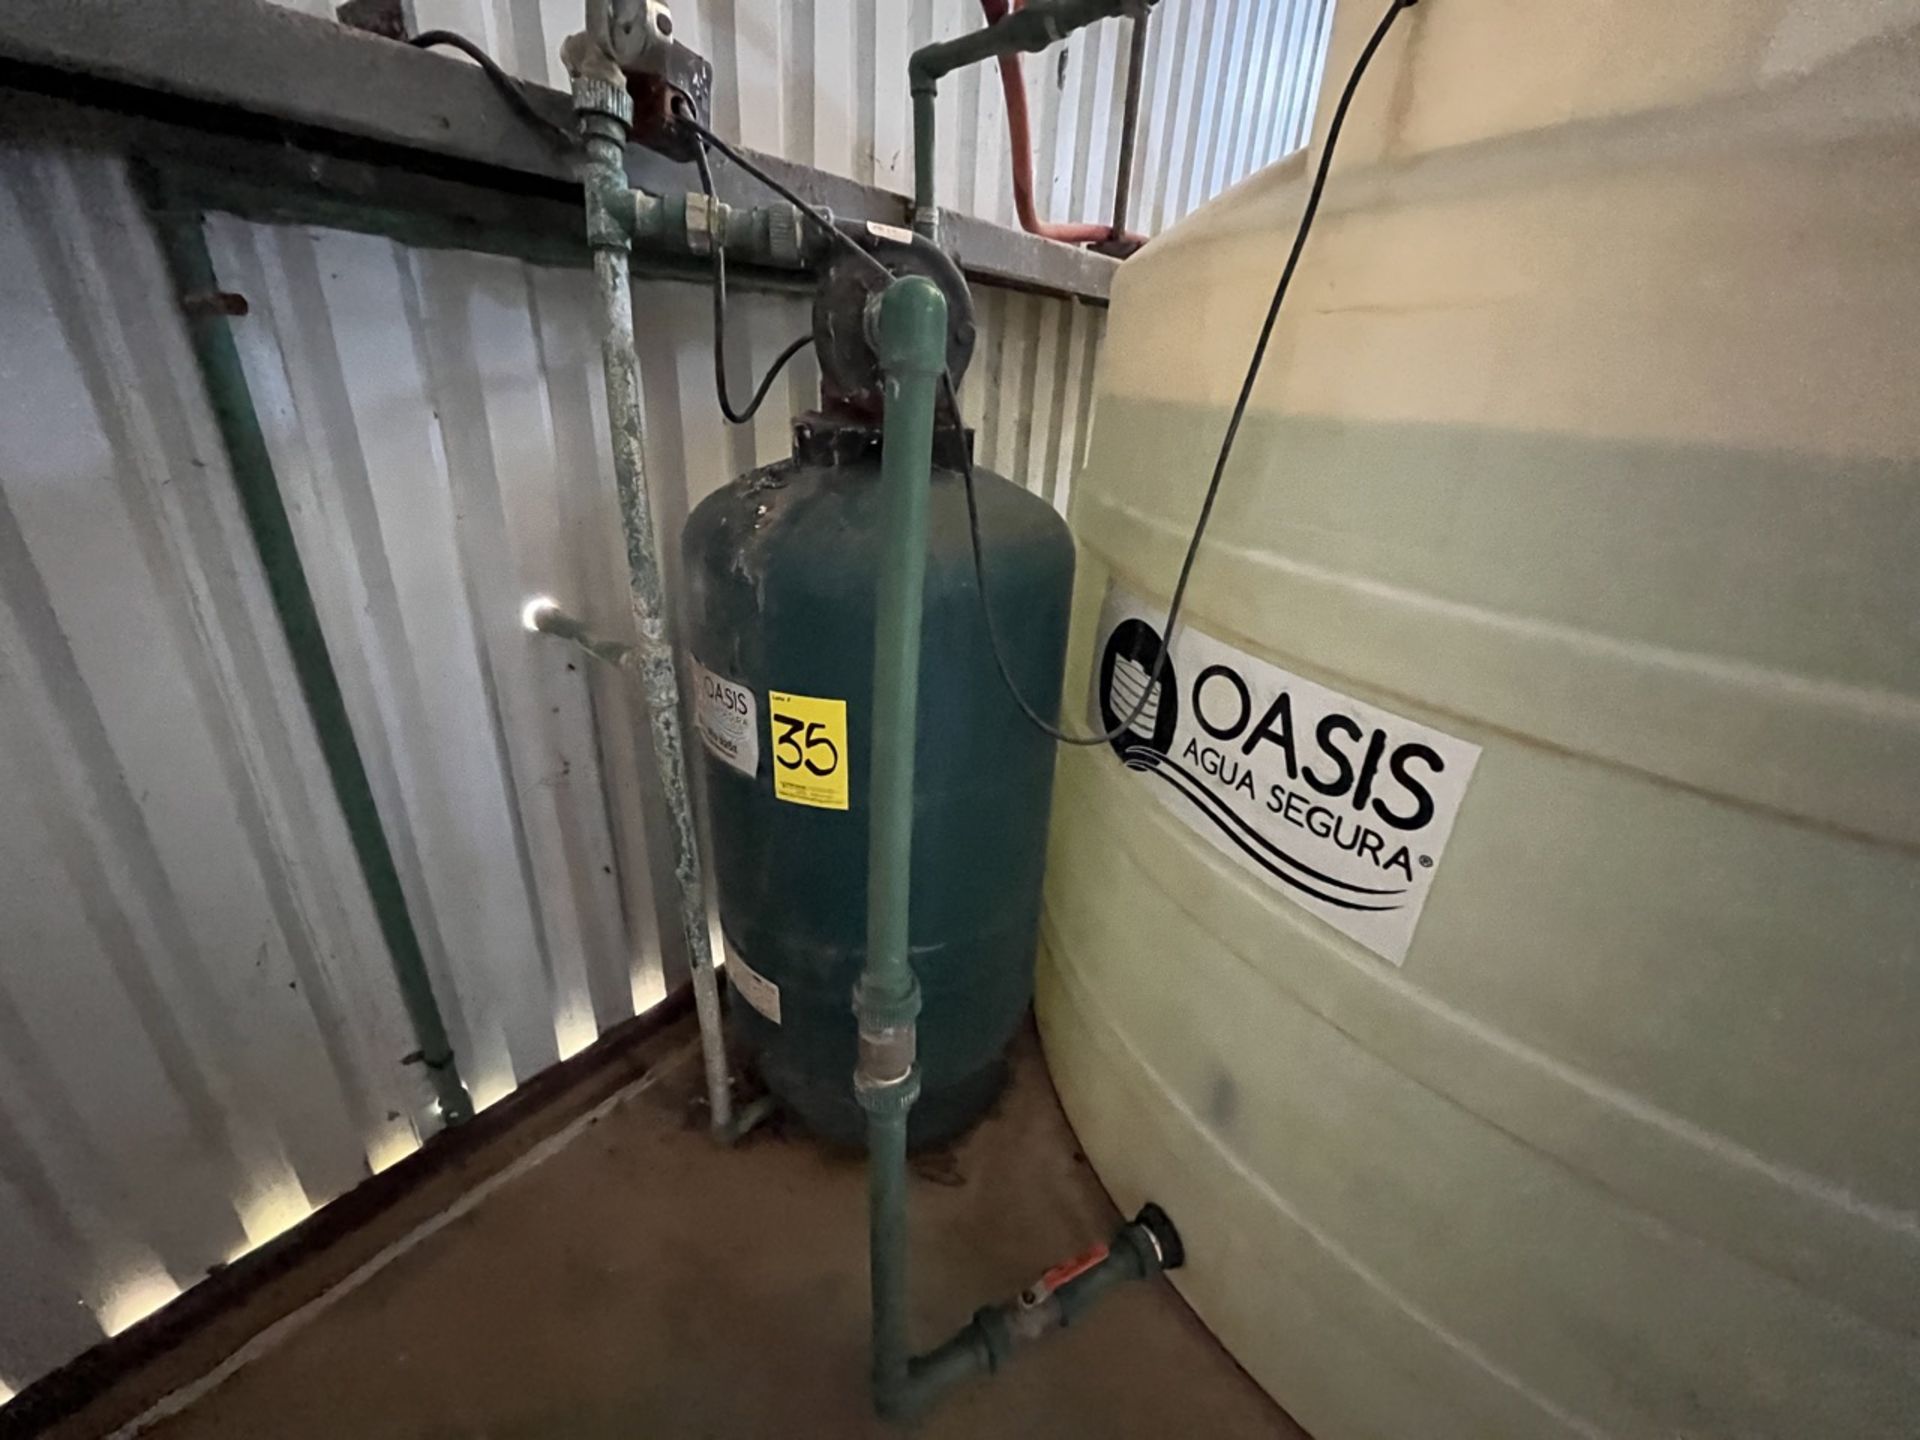 OASIS Water storage tank ,cistern type, capacity of 5 thousand liters approx, measures approx 2.10 - Image 8 of 16